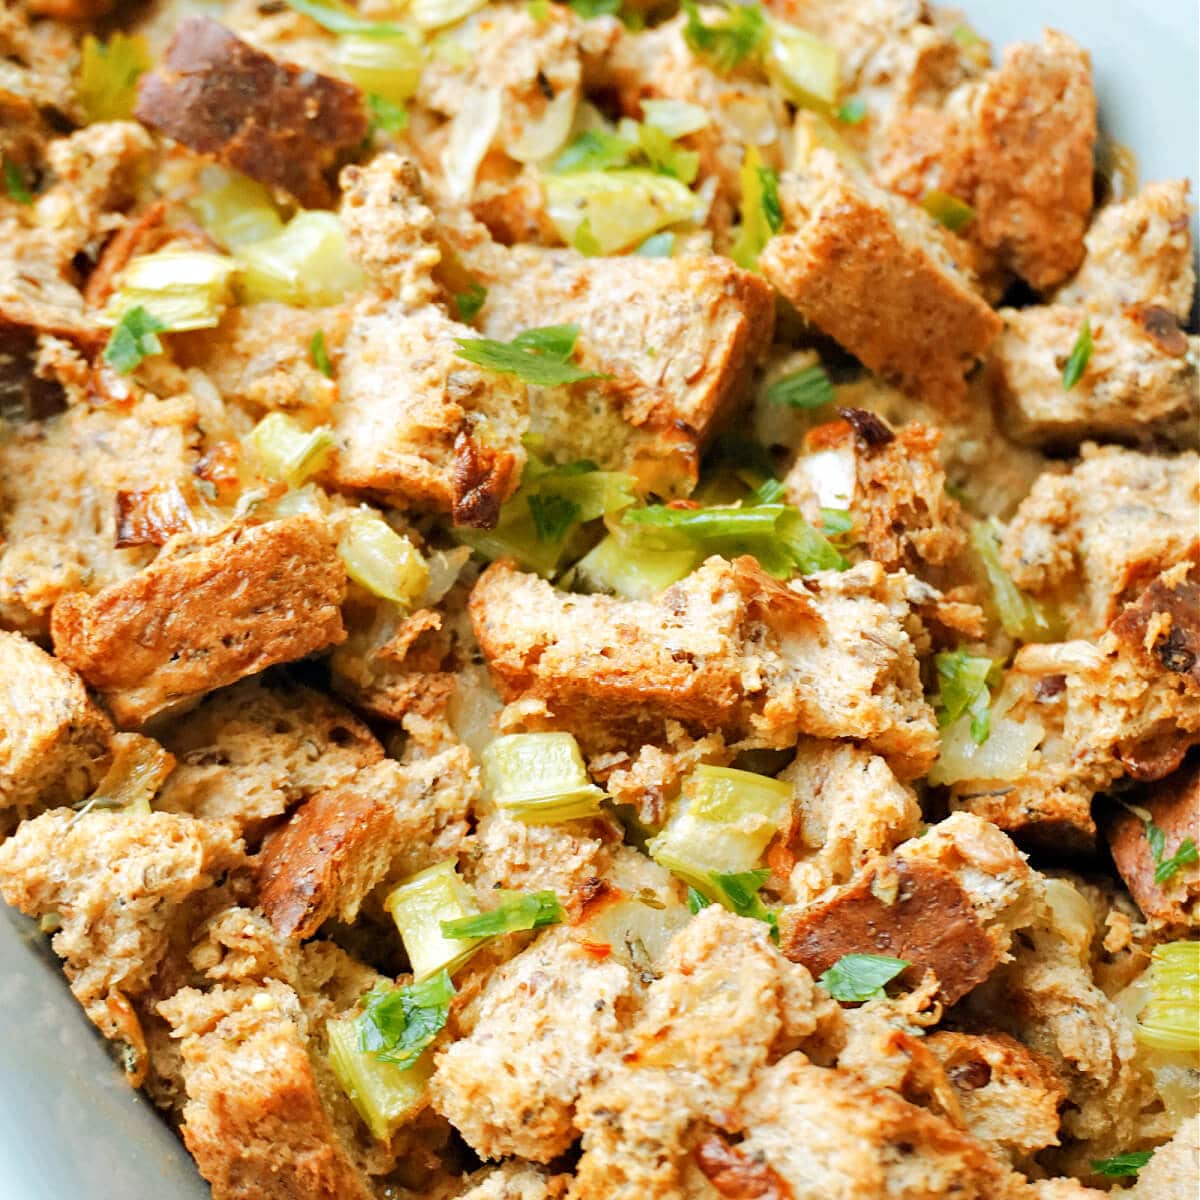 A dish with bread stuffing.